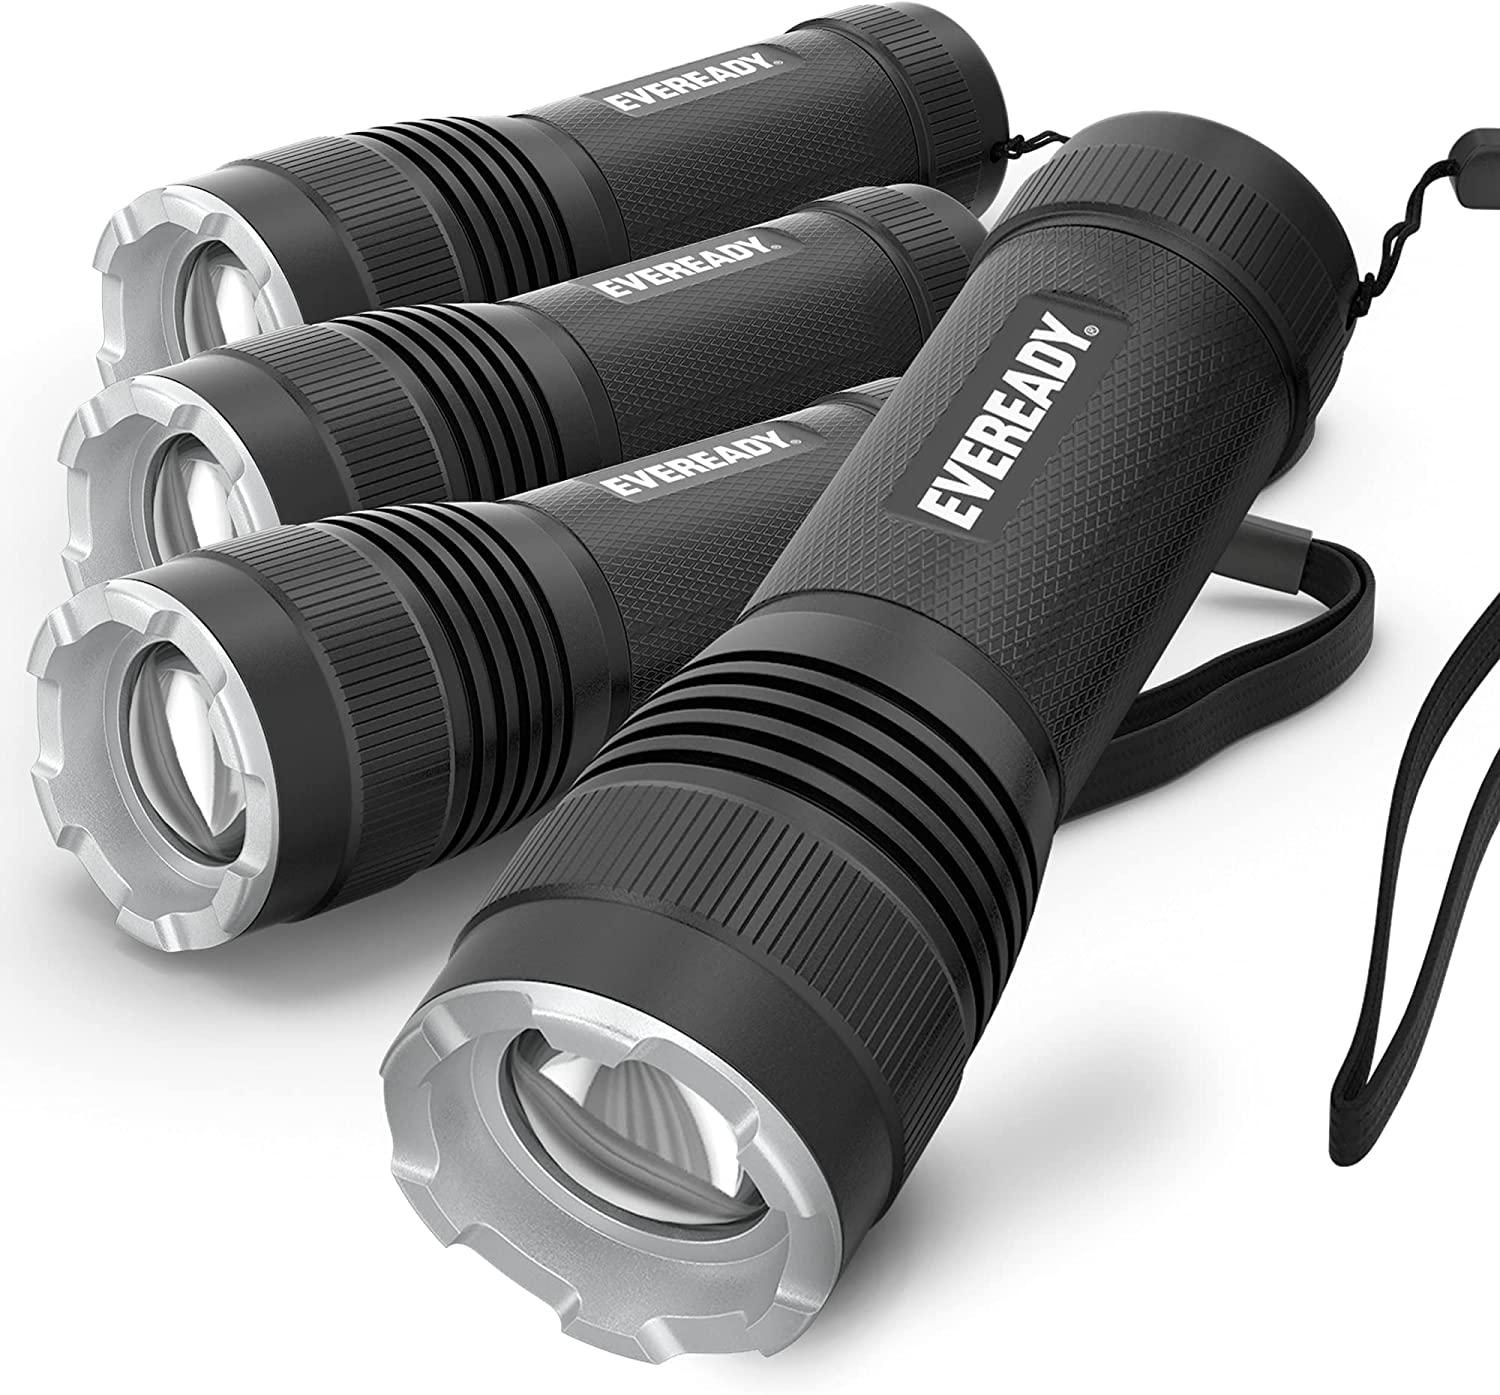 4 Eveready 300 Lumens LED Tactical Flashlights for $10.51